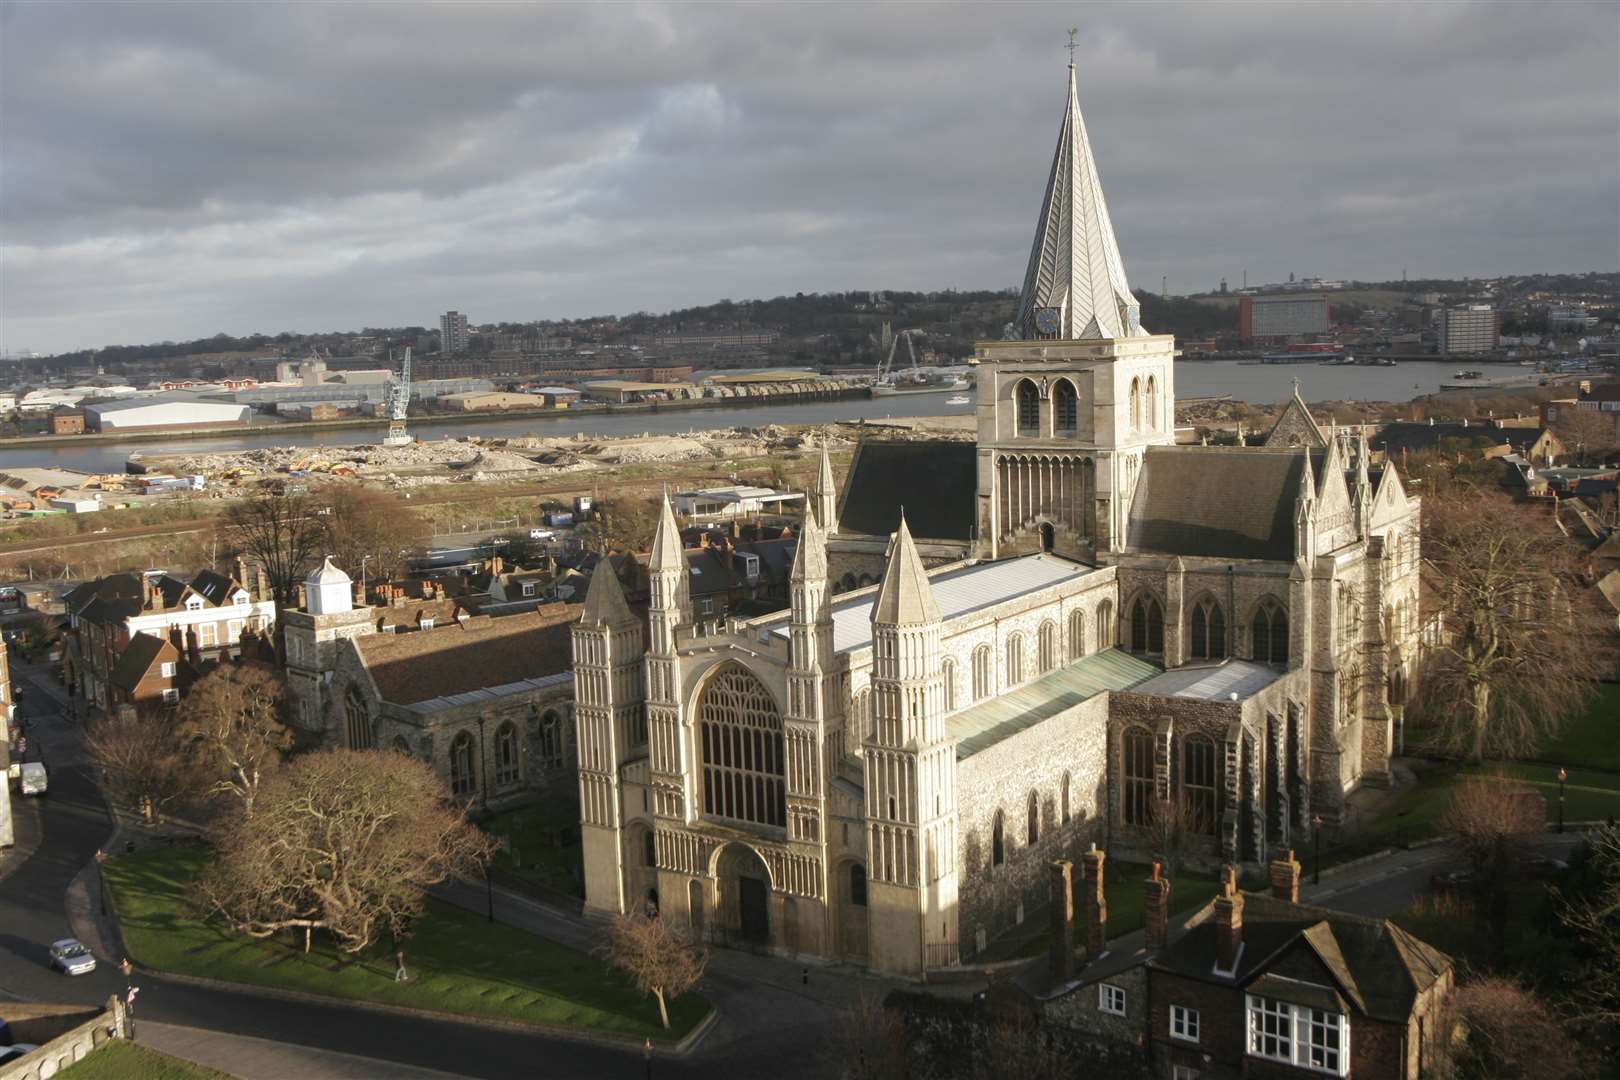 The man collapsed at Rochester Cathedral around 2.30pm